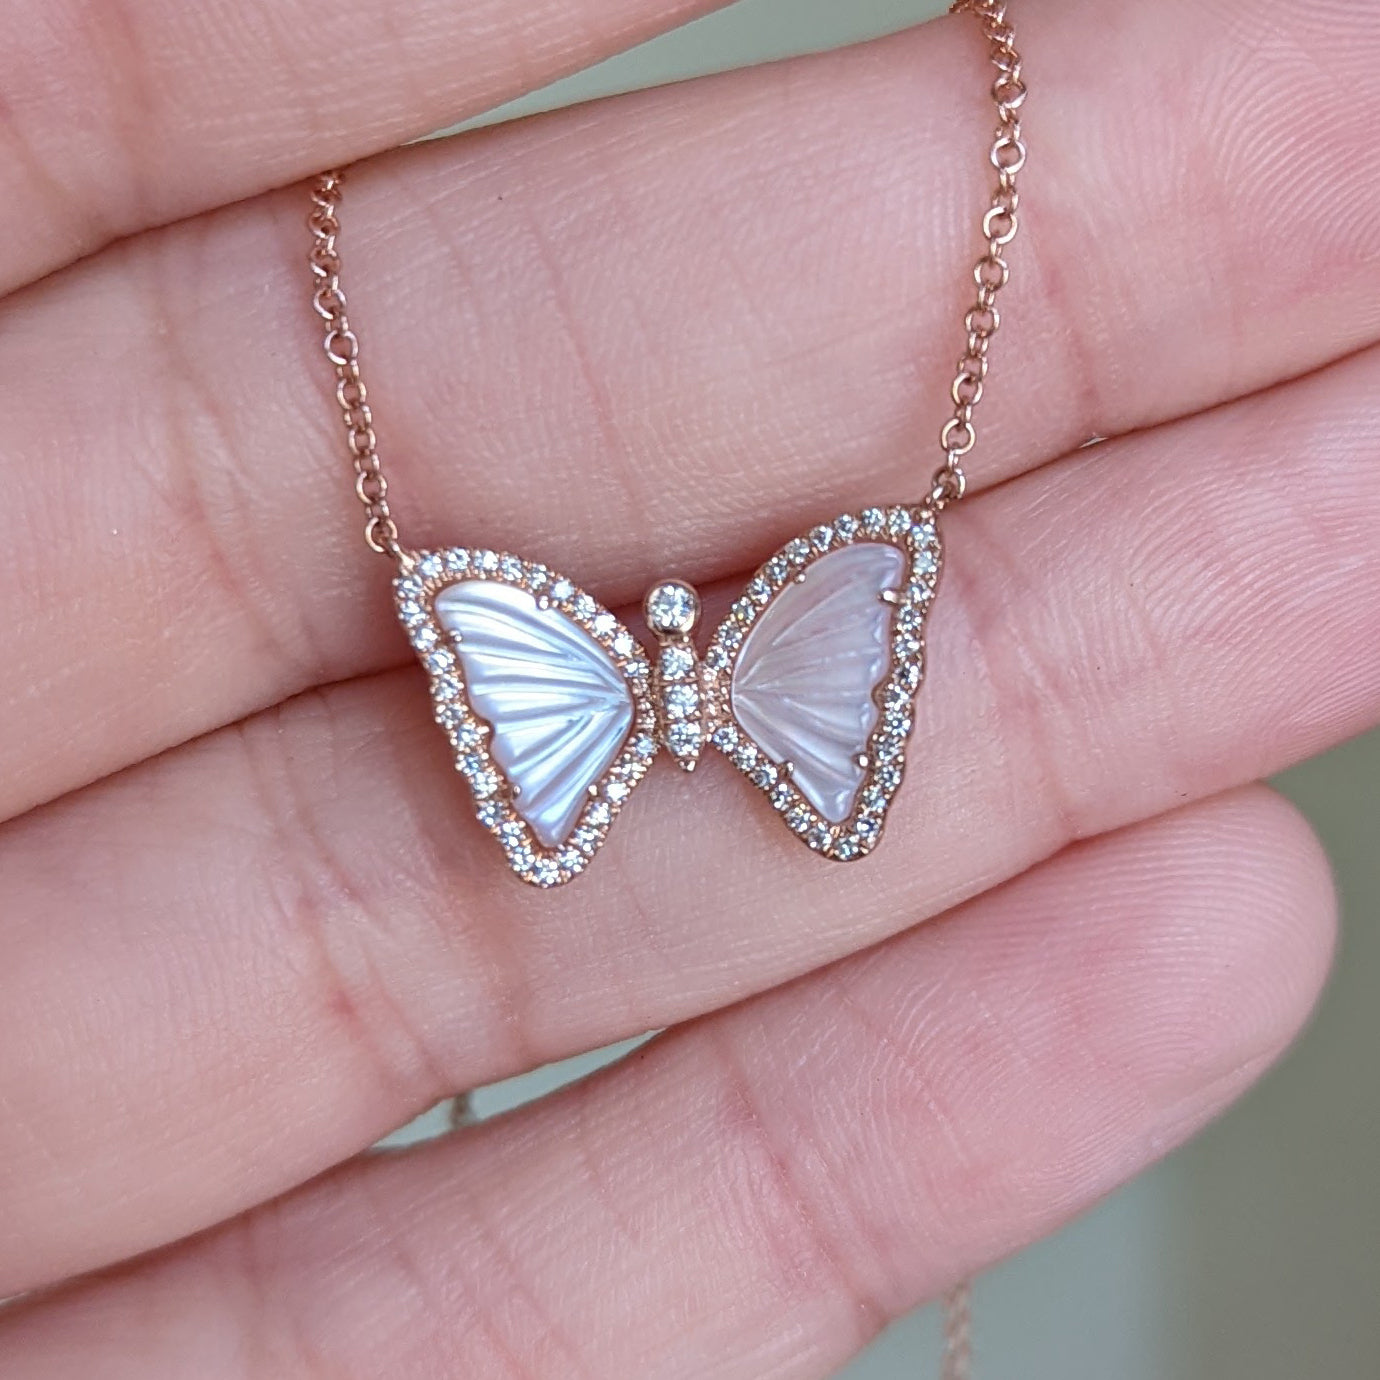 Butterfly Natural Pearl Pink Rose Charms Necklace